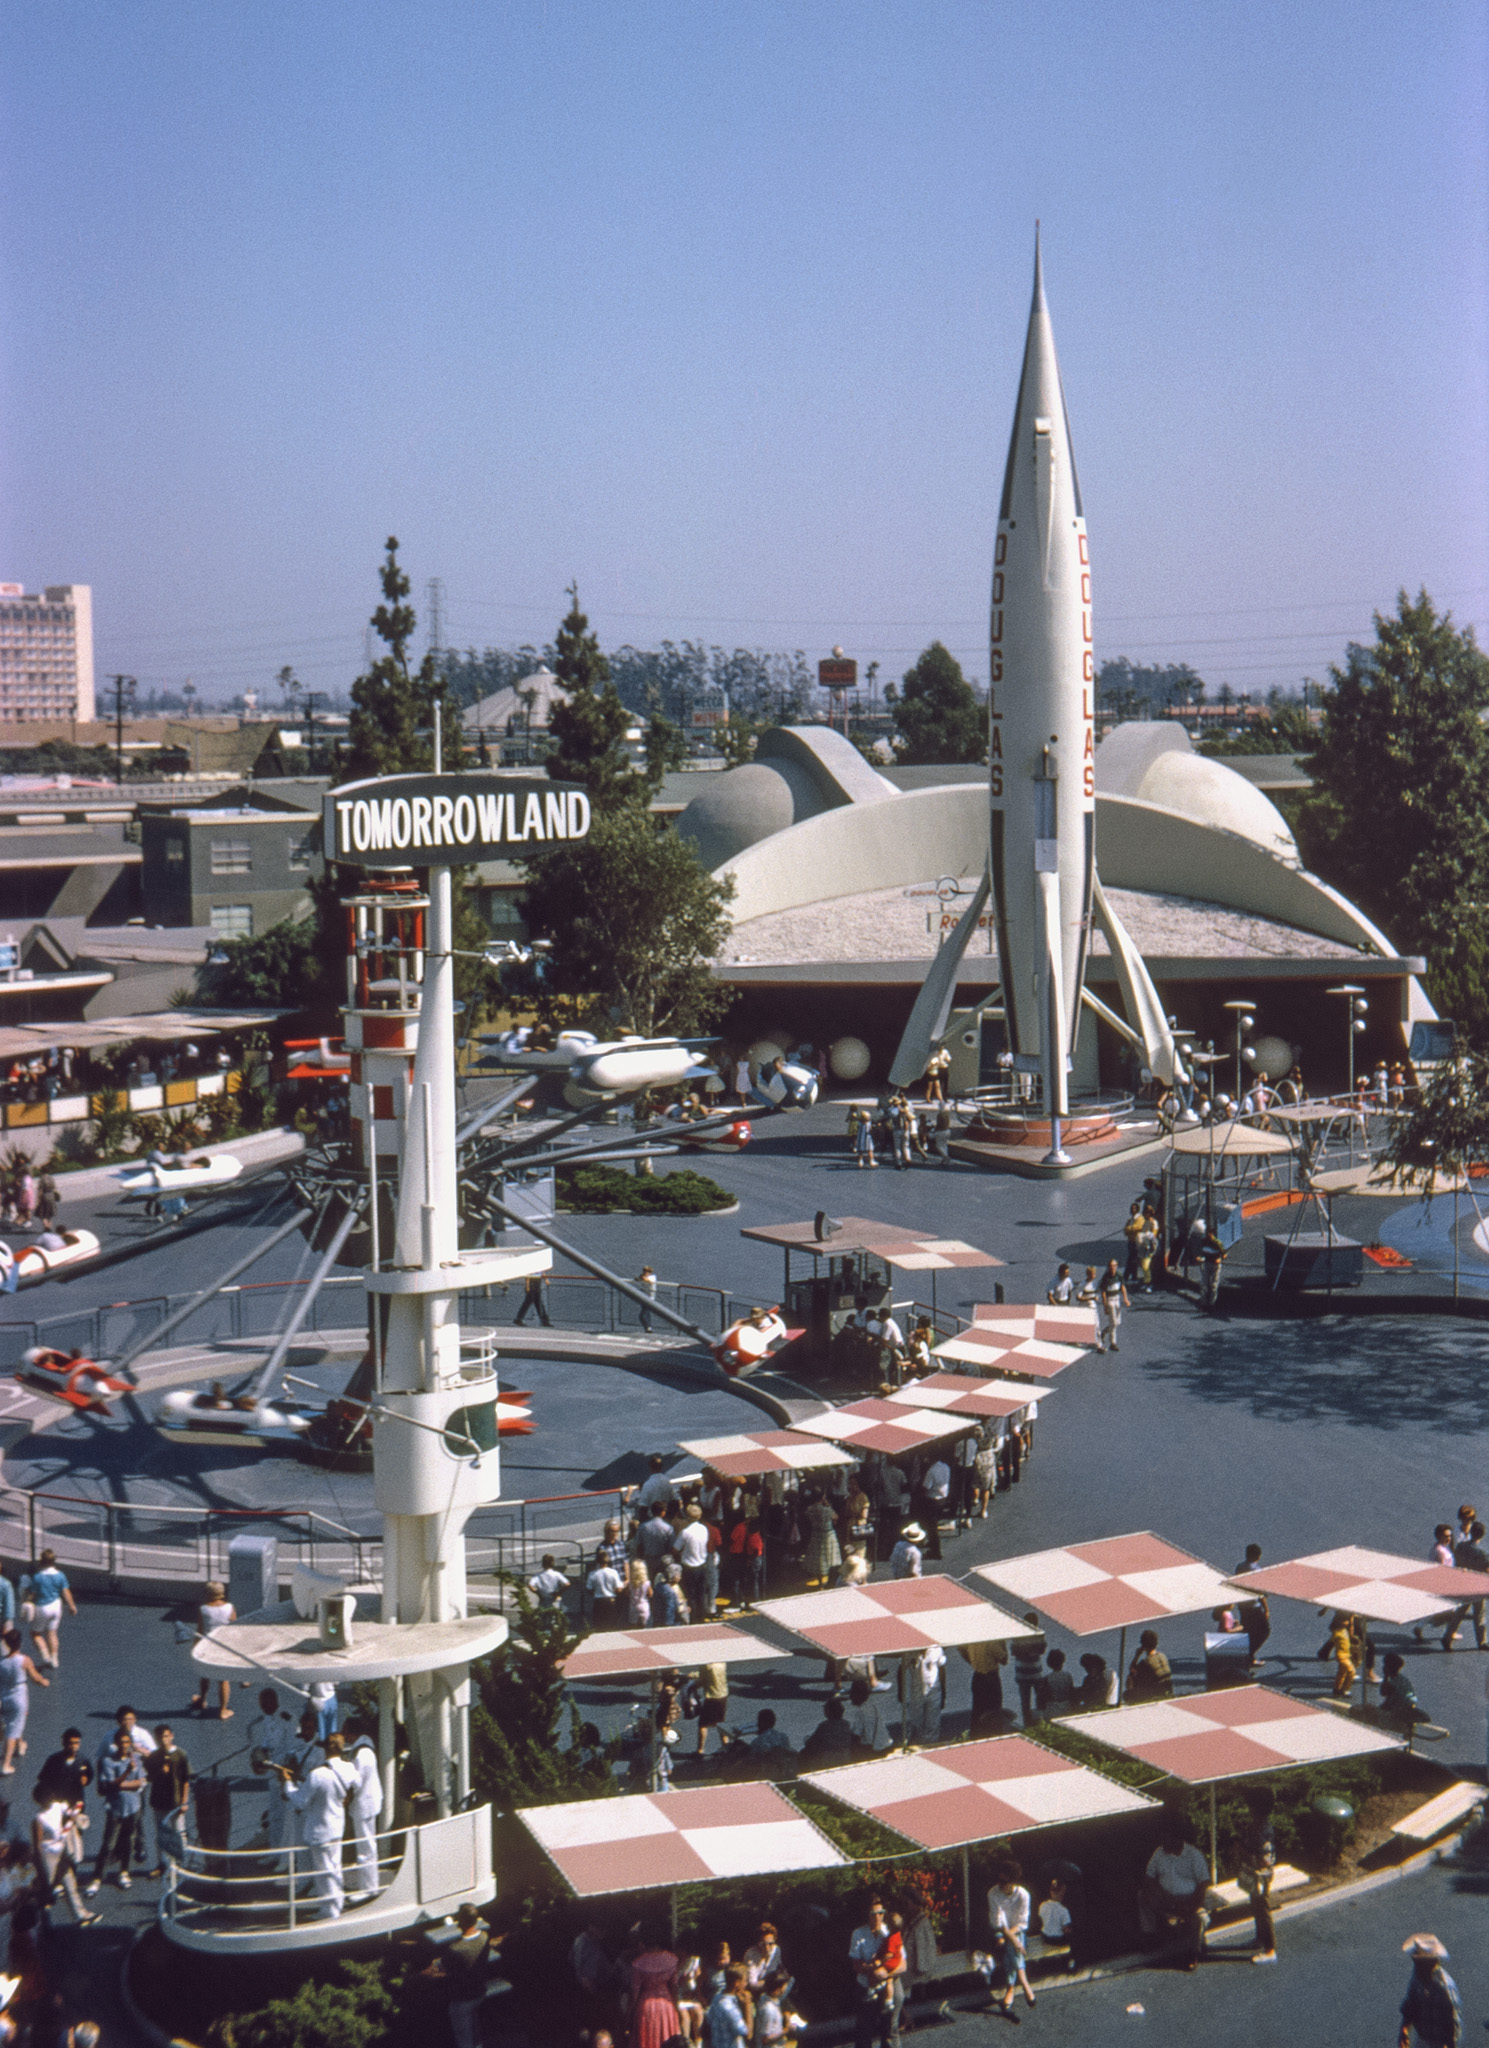 Disneyland, back when Tomorrowland was all about rocket ships. Two years later, the Moon Ride was still there, but the rocket was gone. My Kodachrome slide, taken from the late lamented Skyway gondola ride, itself dismantled in 1994.